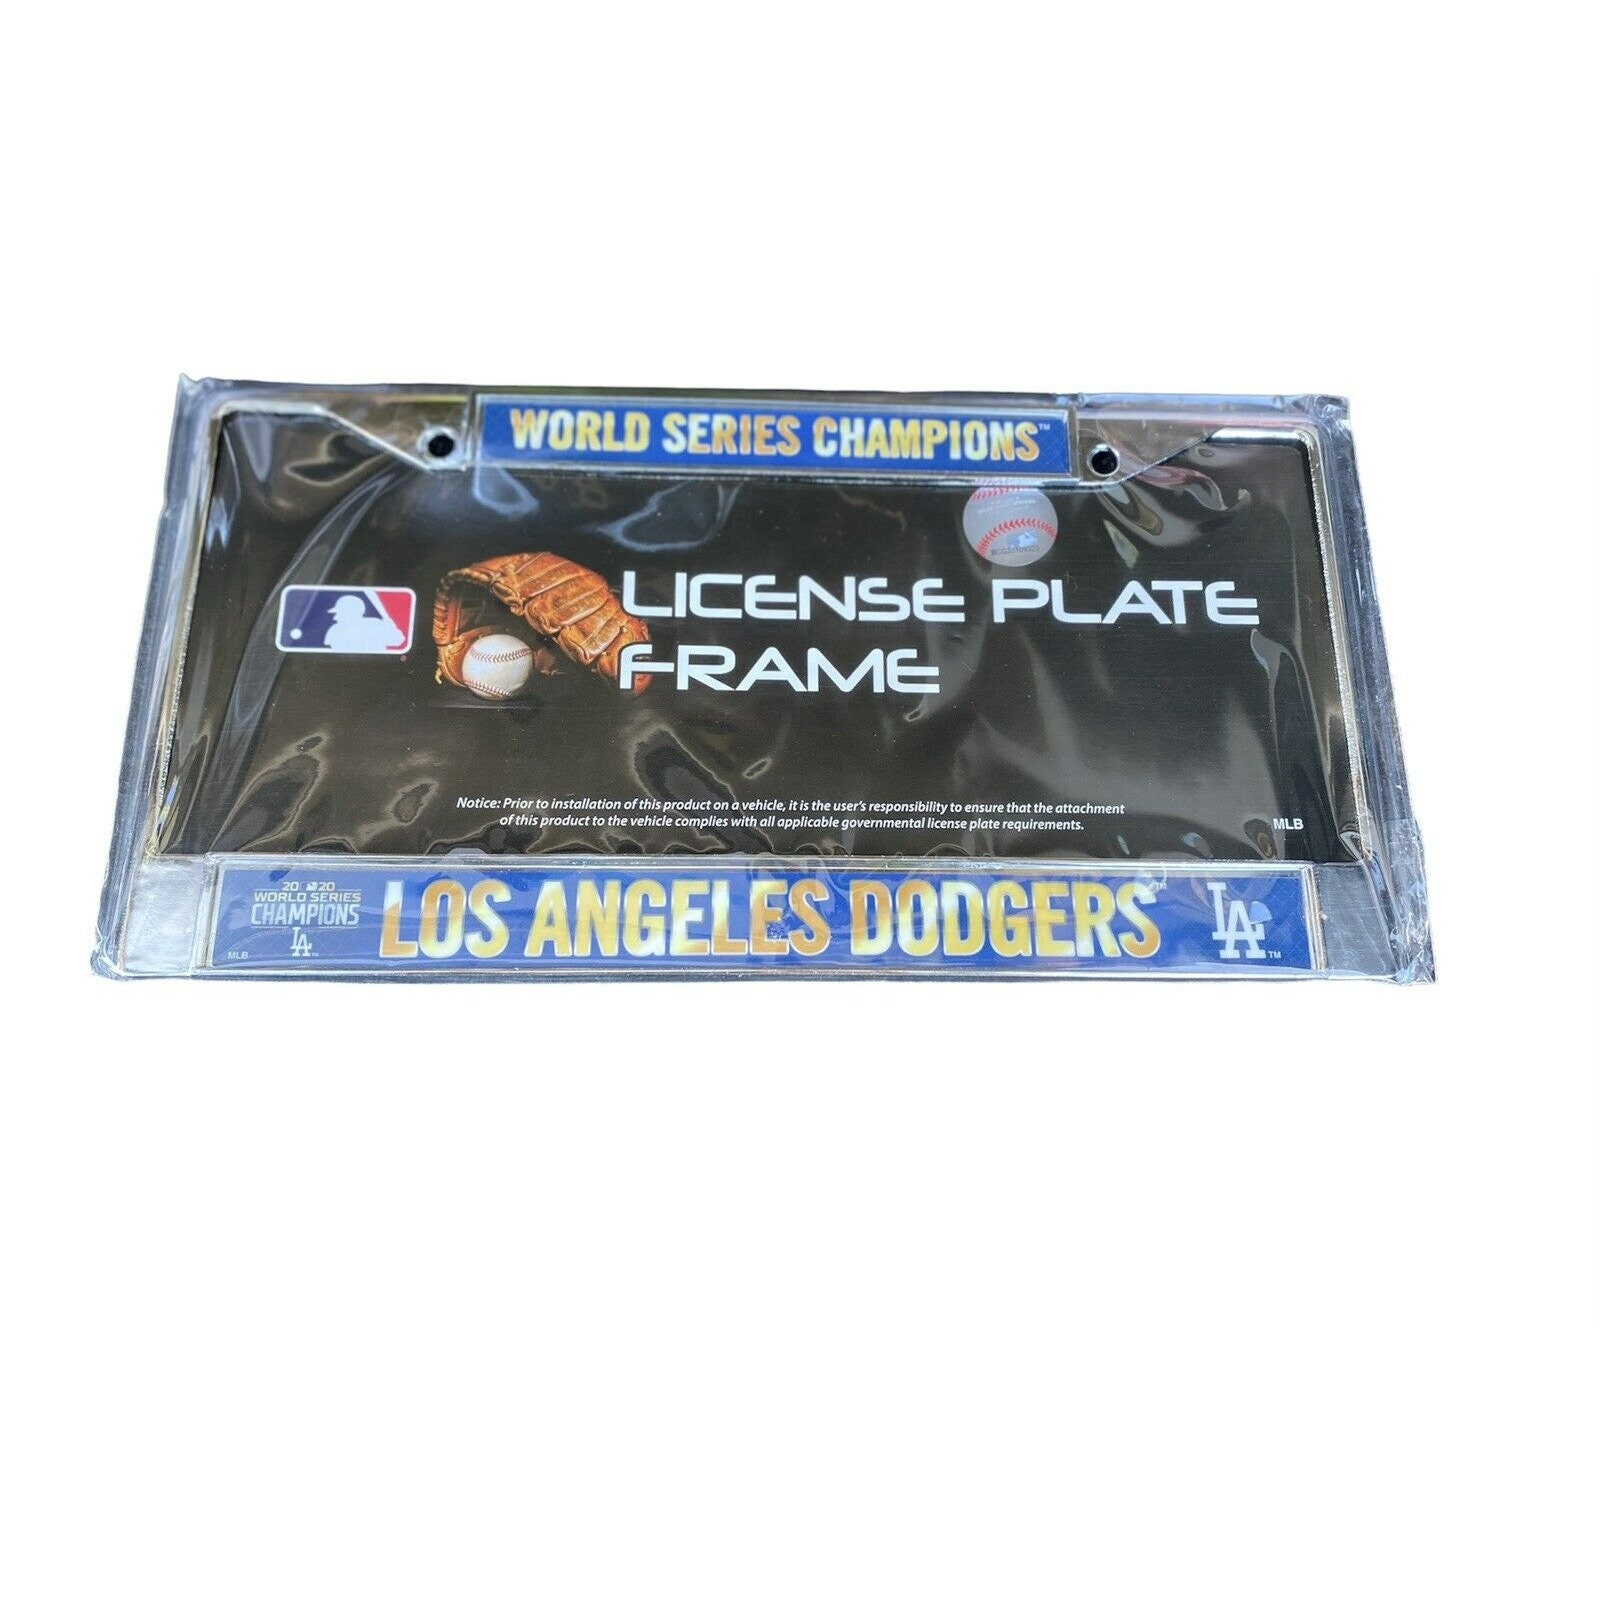 1 Los Angeles Dodgers Chrome License Plate Frame w\ Laser Cut Acrylic  Letters